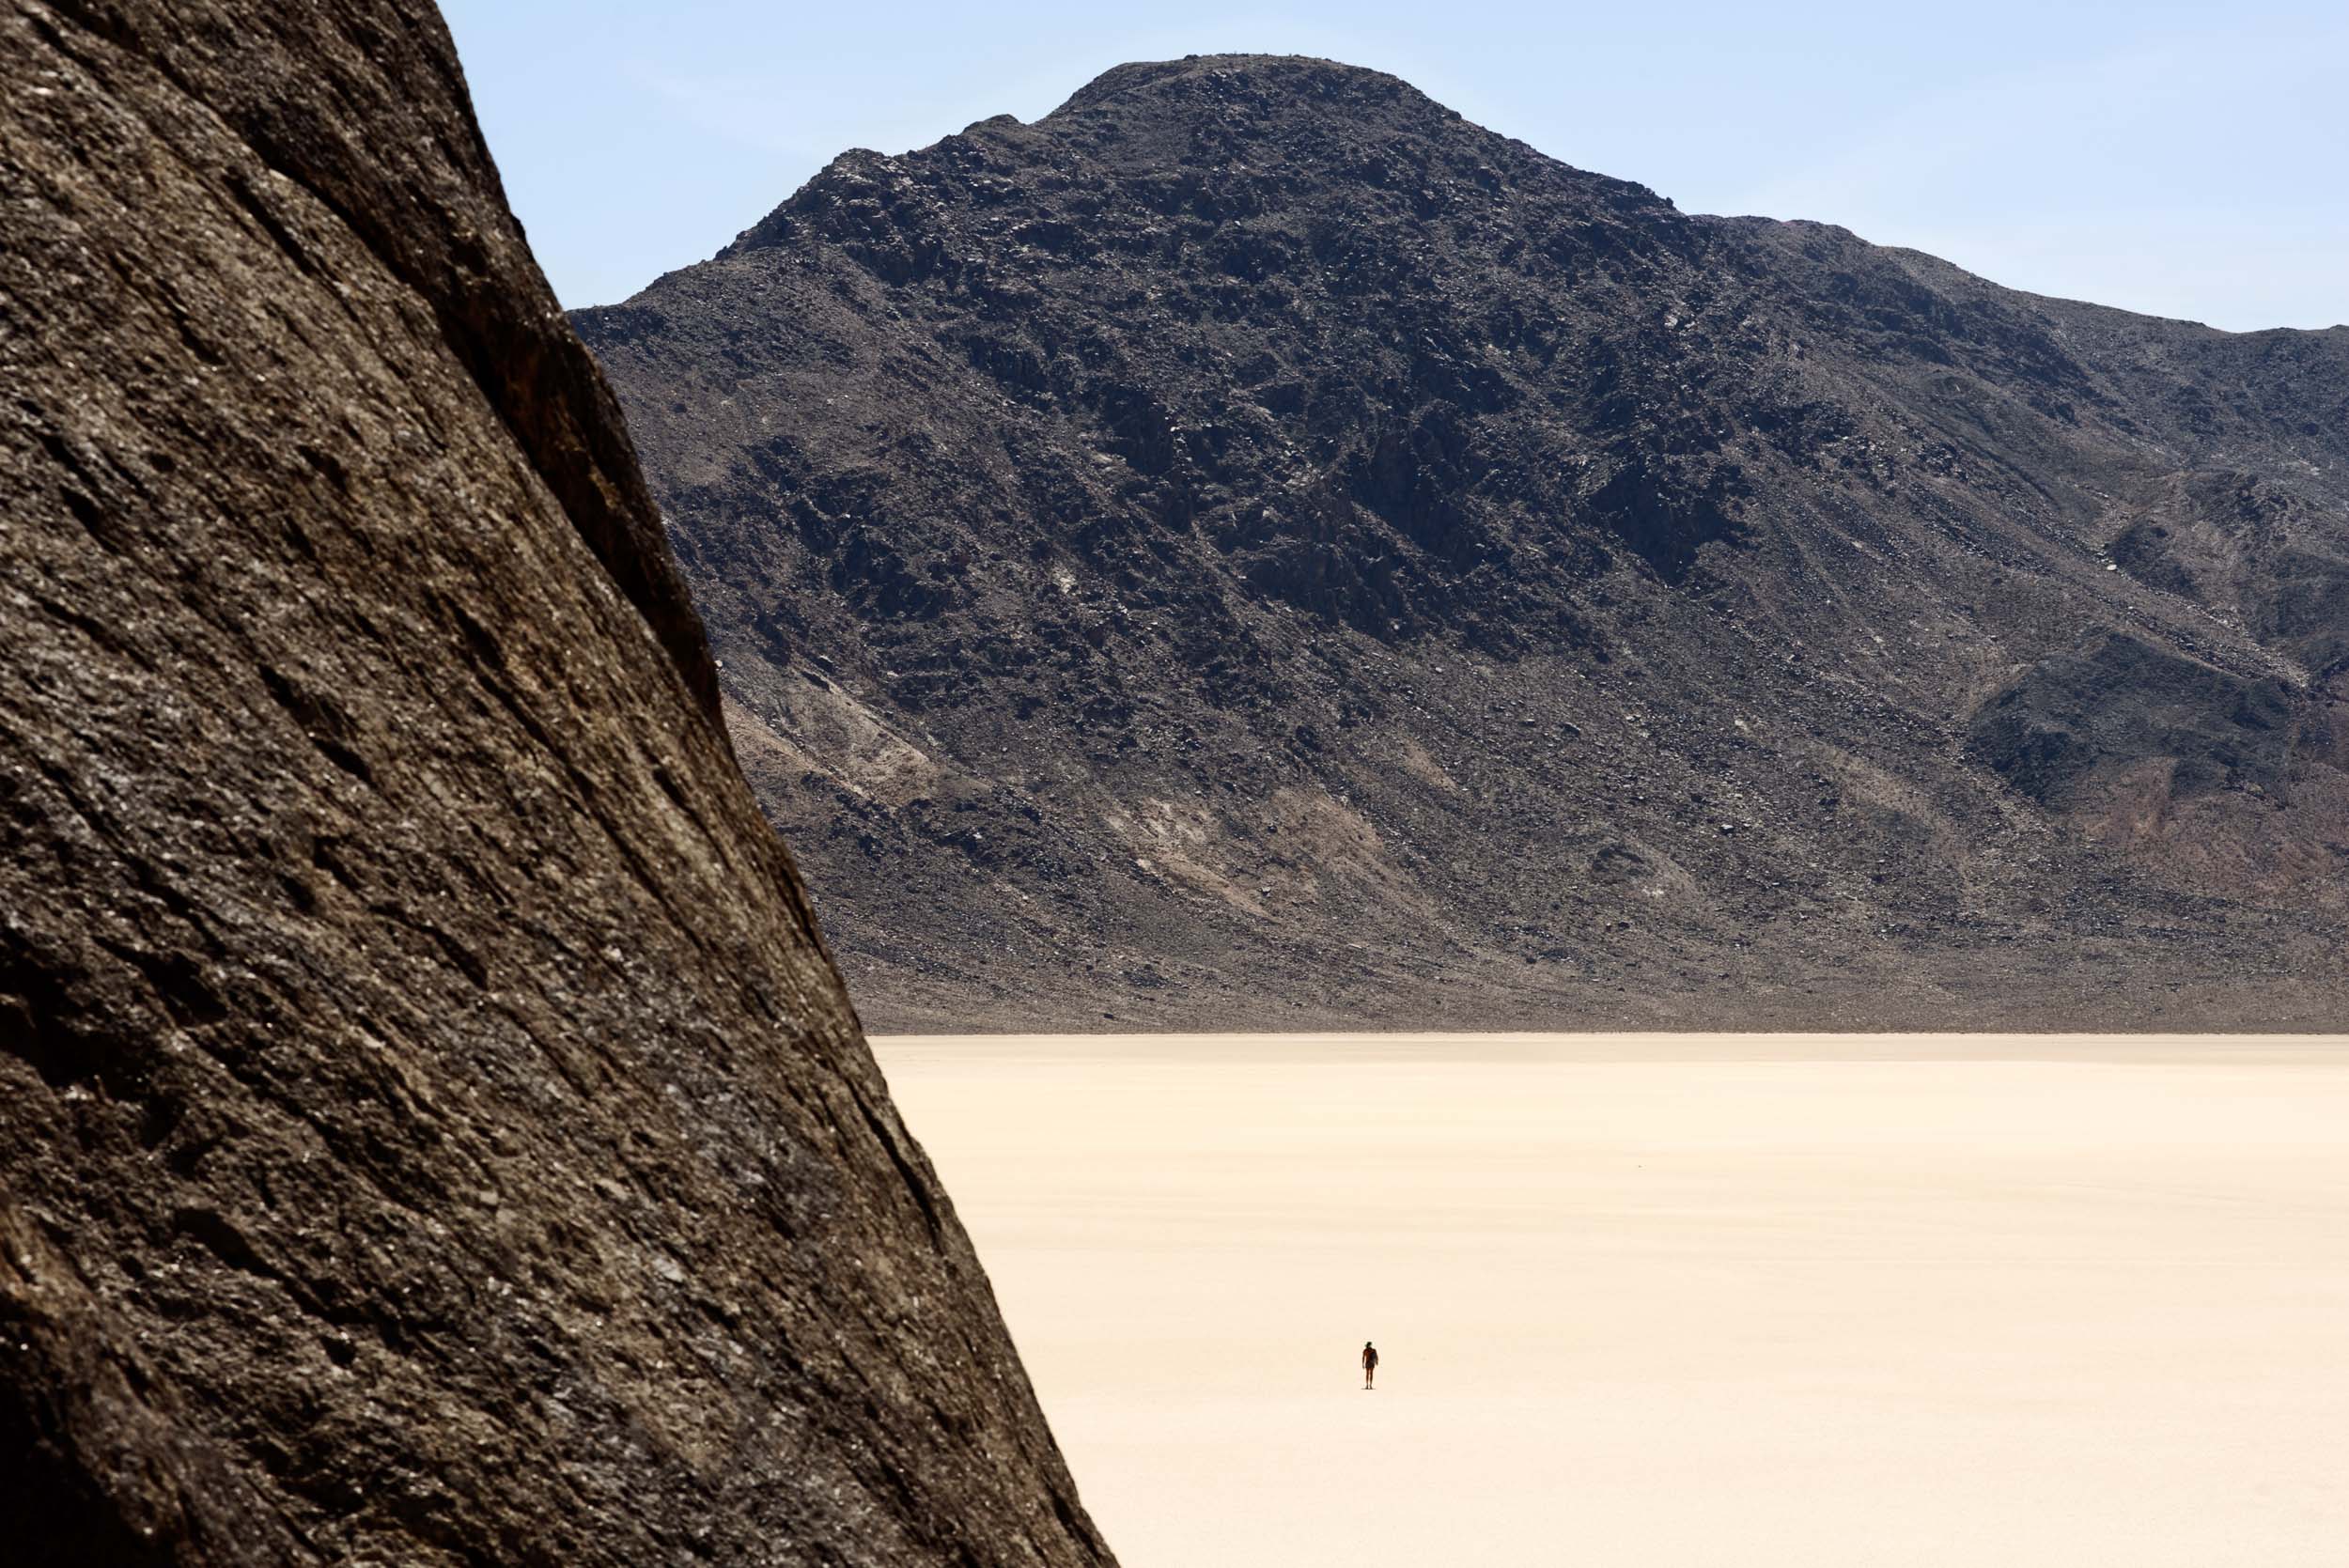 A man walks on the Racetrack Playa in Death Valley National Park.